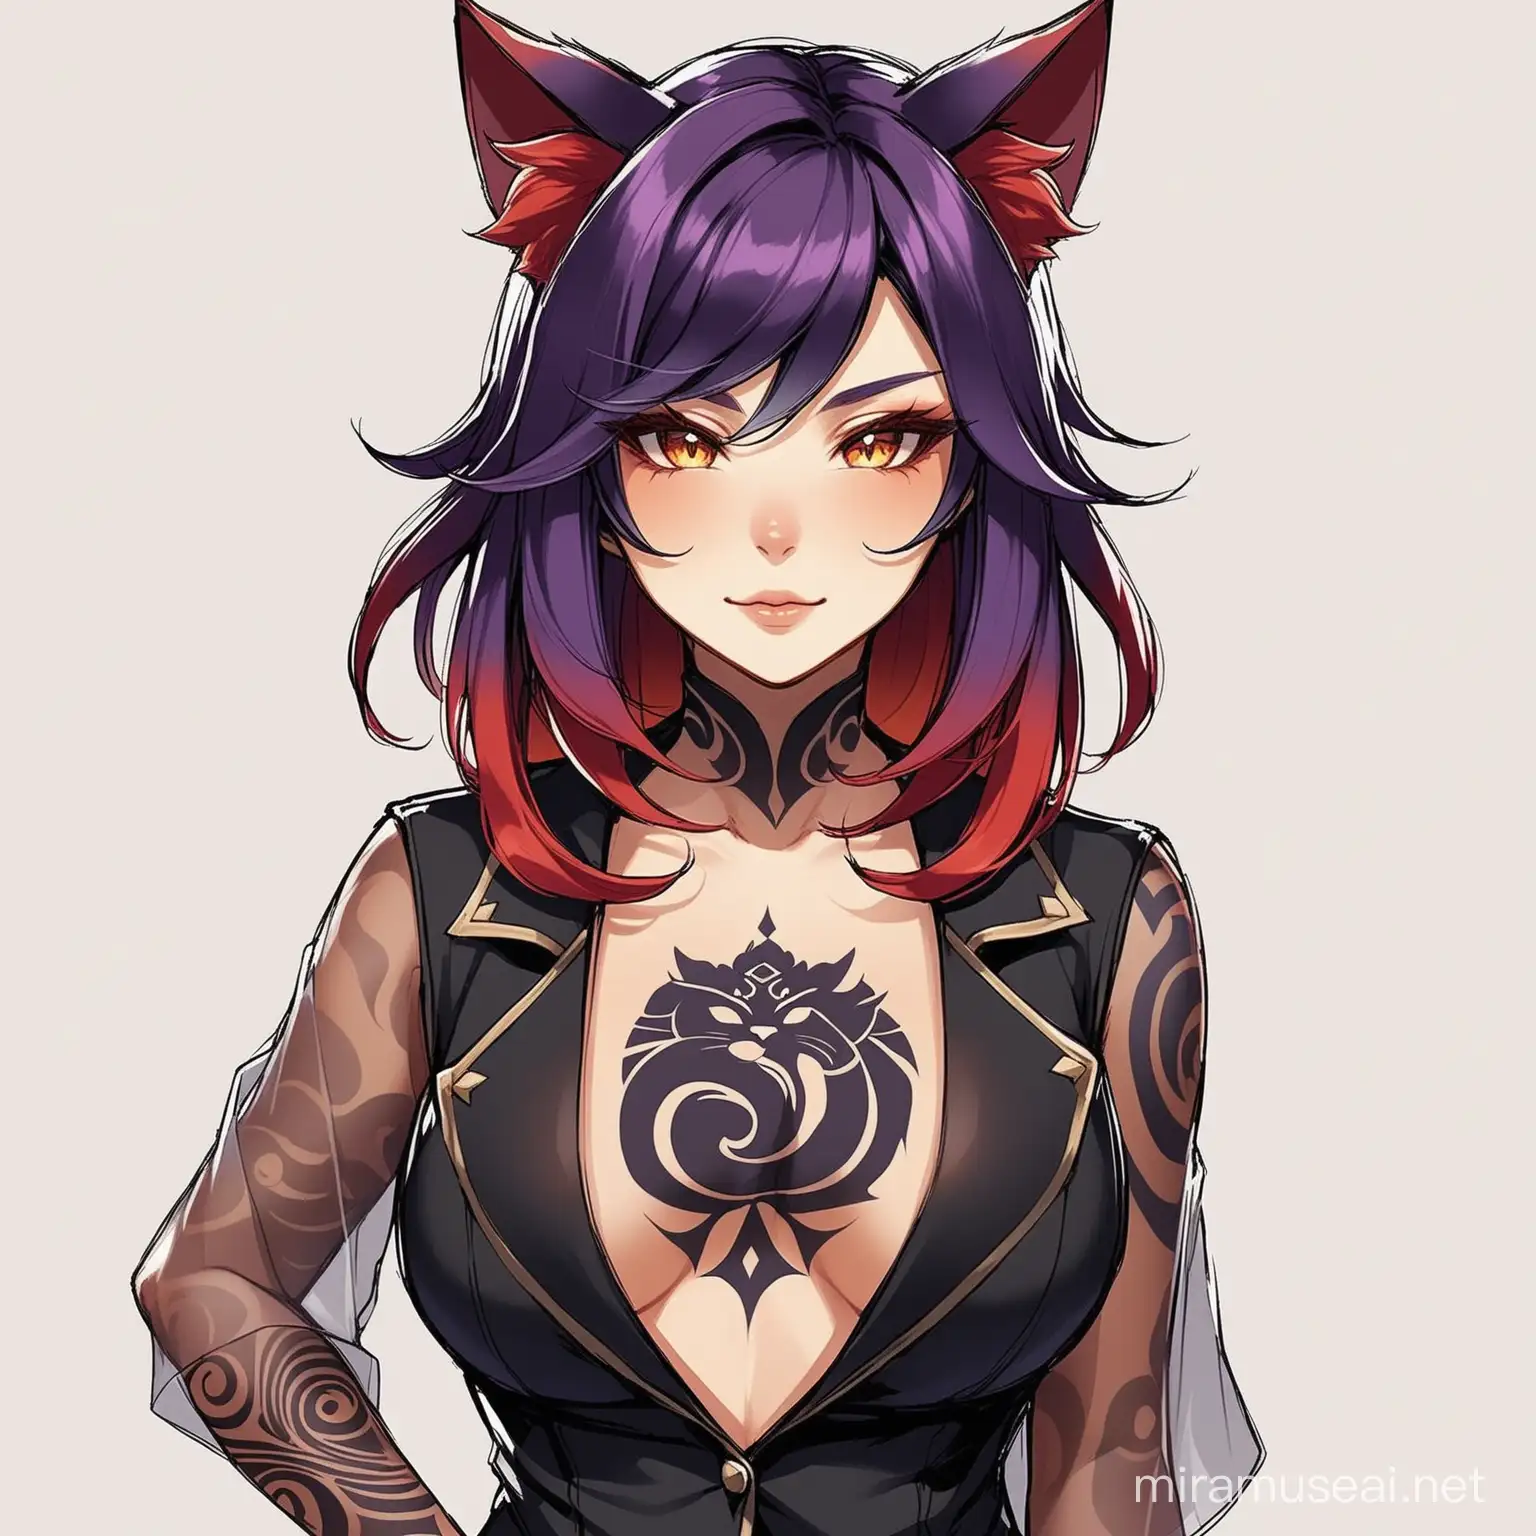 draw a character you'd see in genshin impact with red cat ears, long red and purple hair, mature, open black jacket, see through shirt, black swirl tattoos on skin